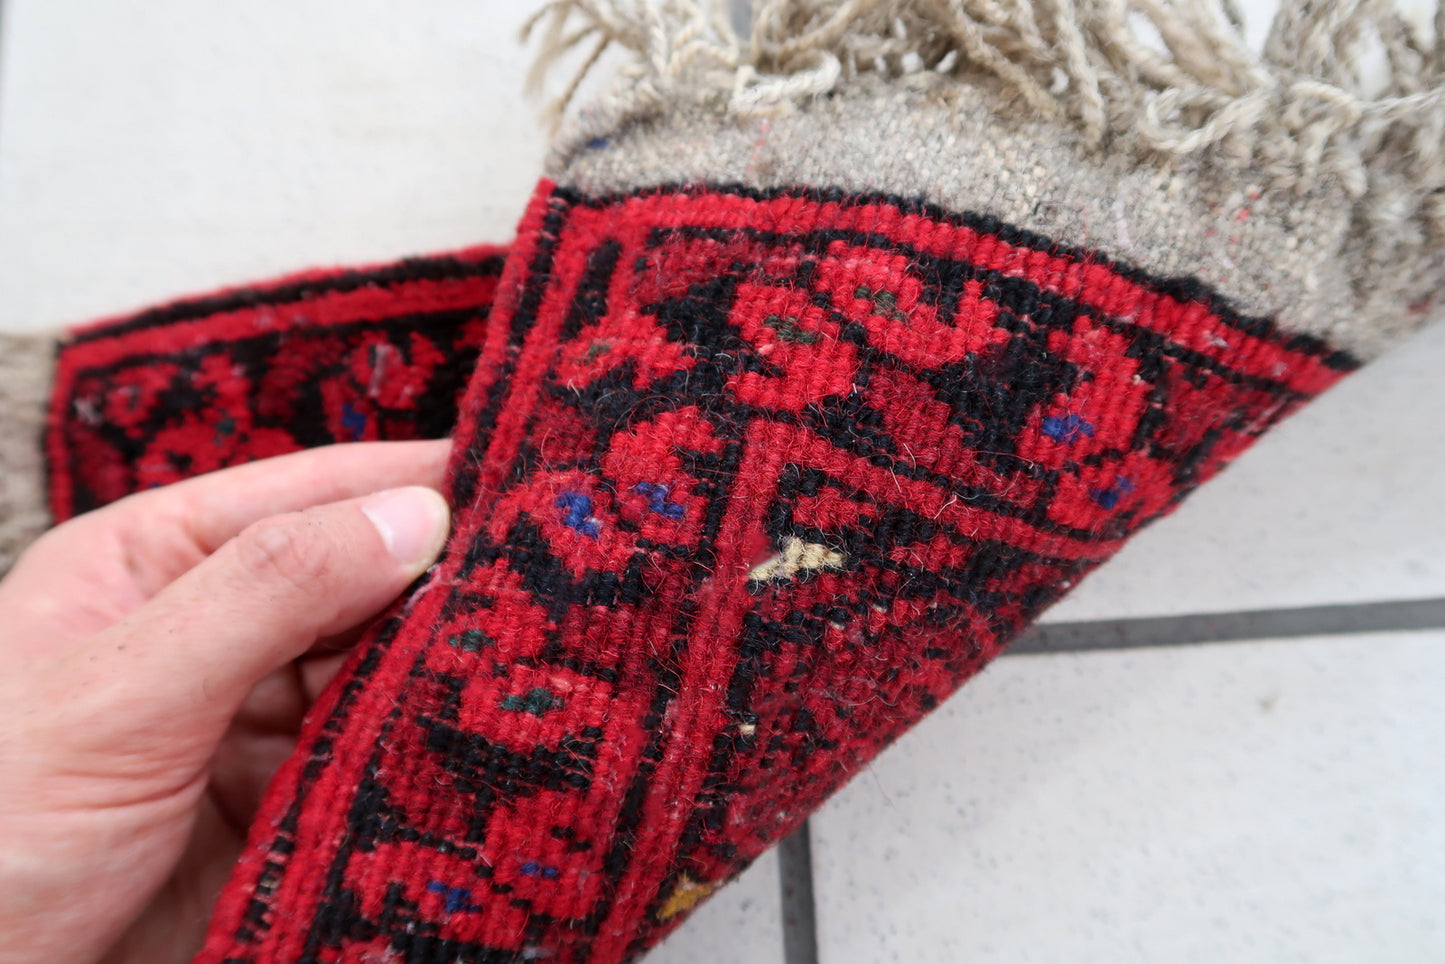 Handmade vintage Afghan Ersari mat in bright red shade. The rug is from the end of 20th century in original good condition. It can be used as a doll house rug.